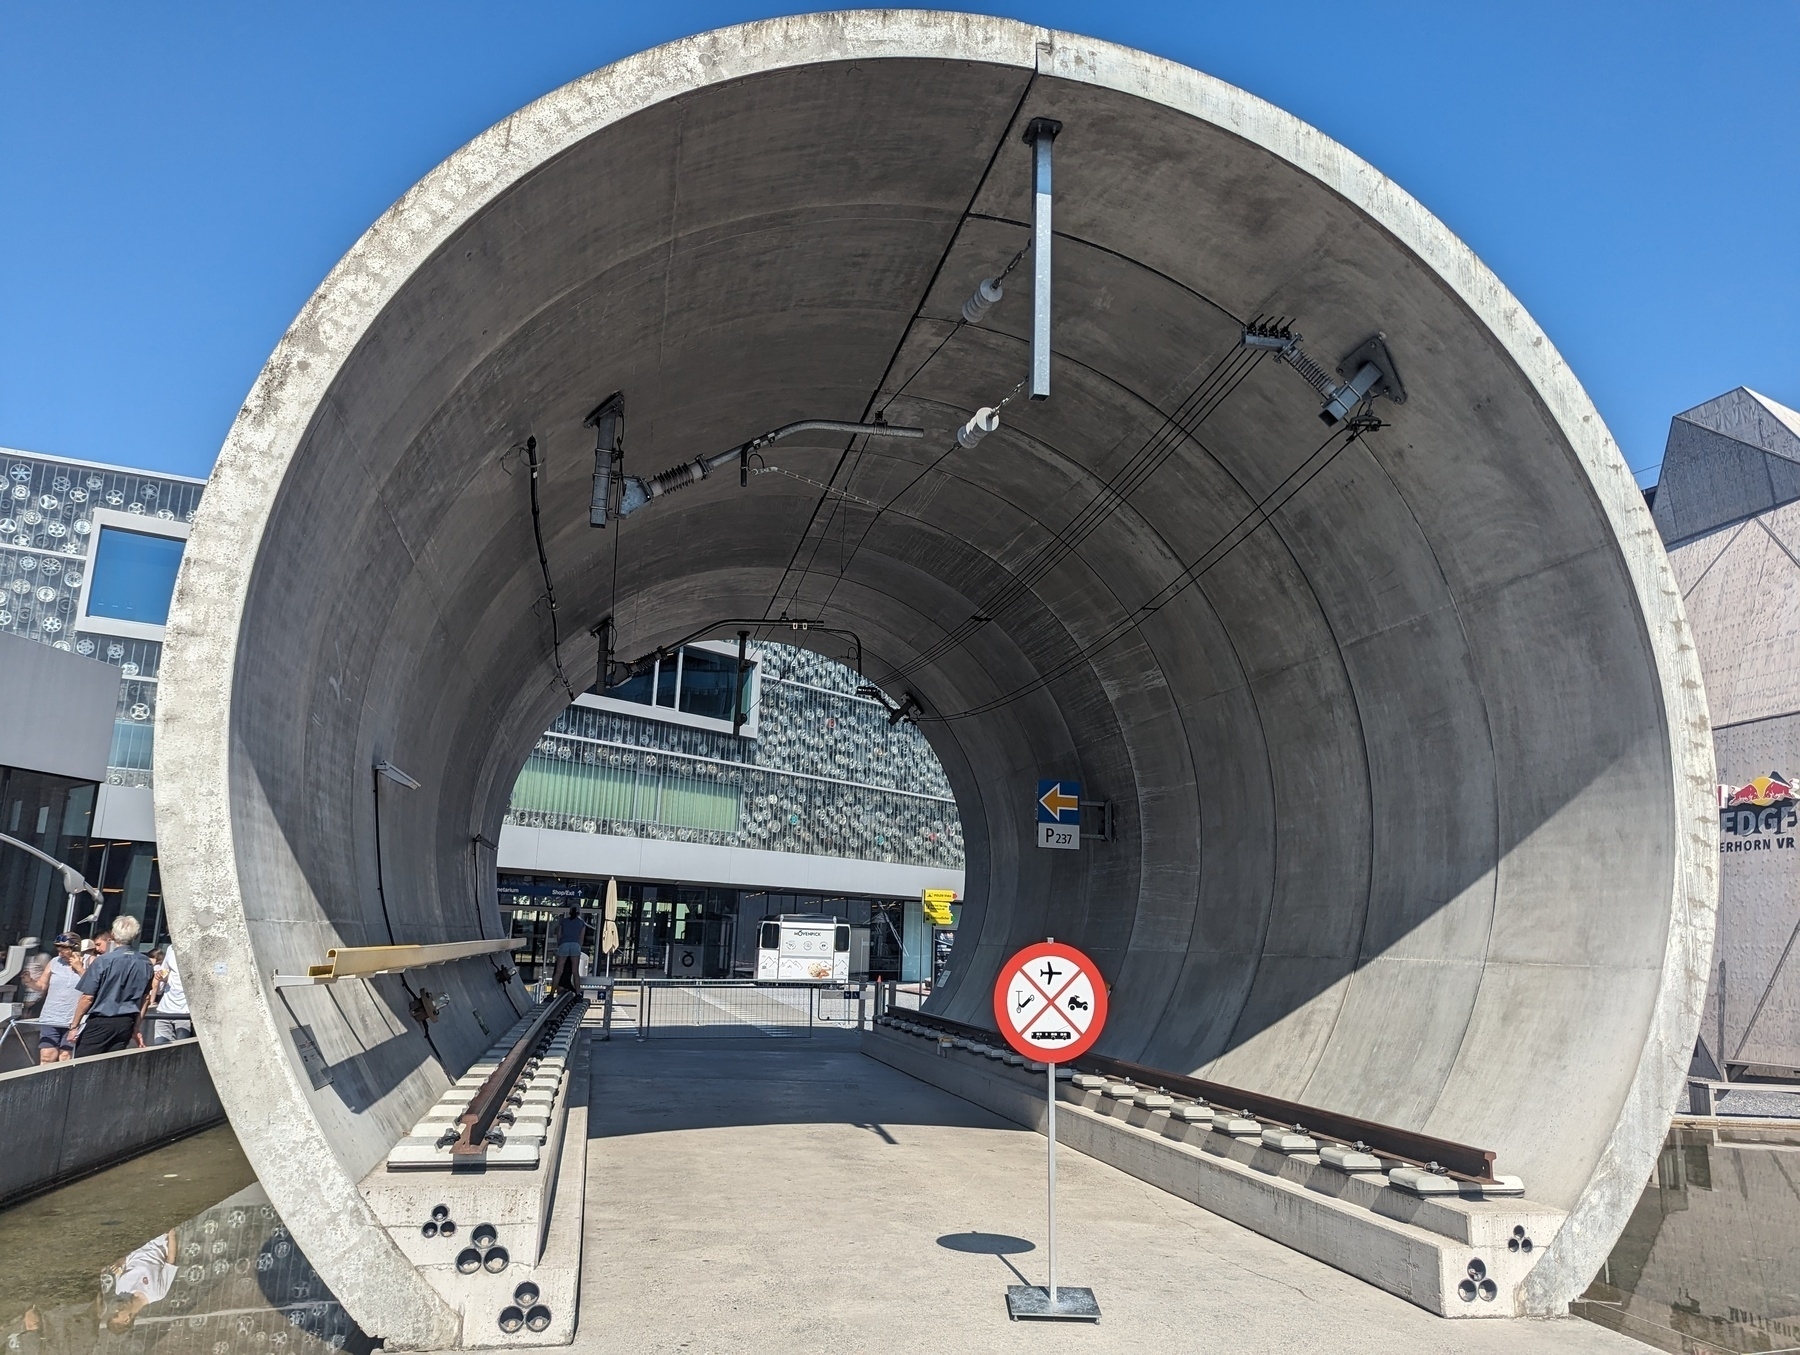 Cross-section of the Gotthard Base Tunnel outside exhibit.